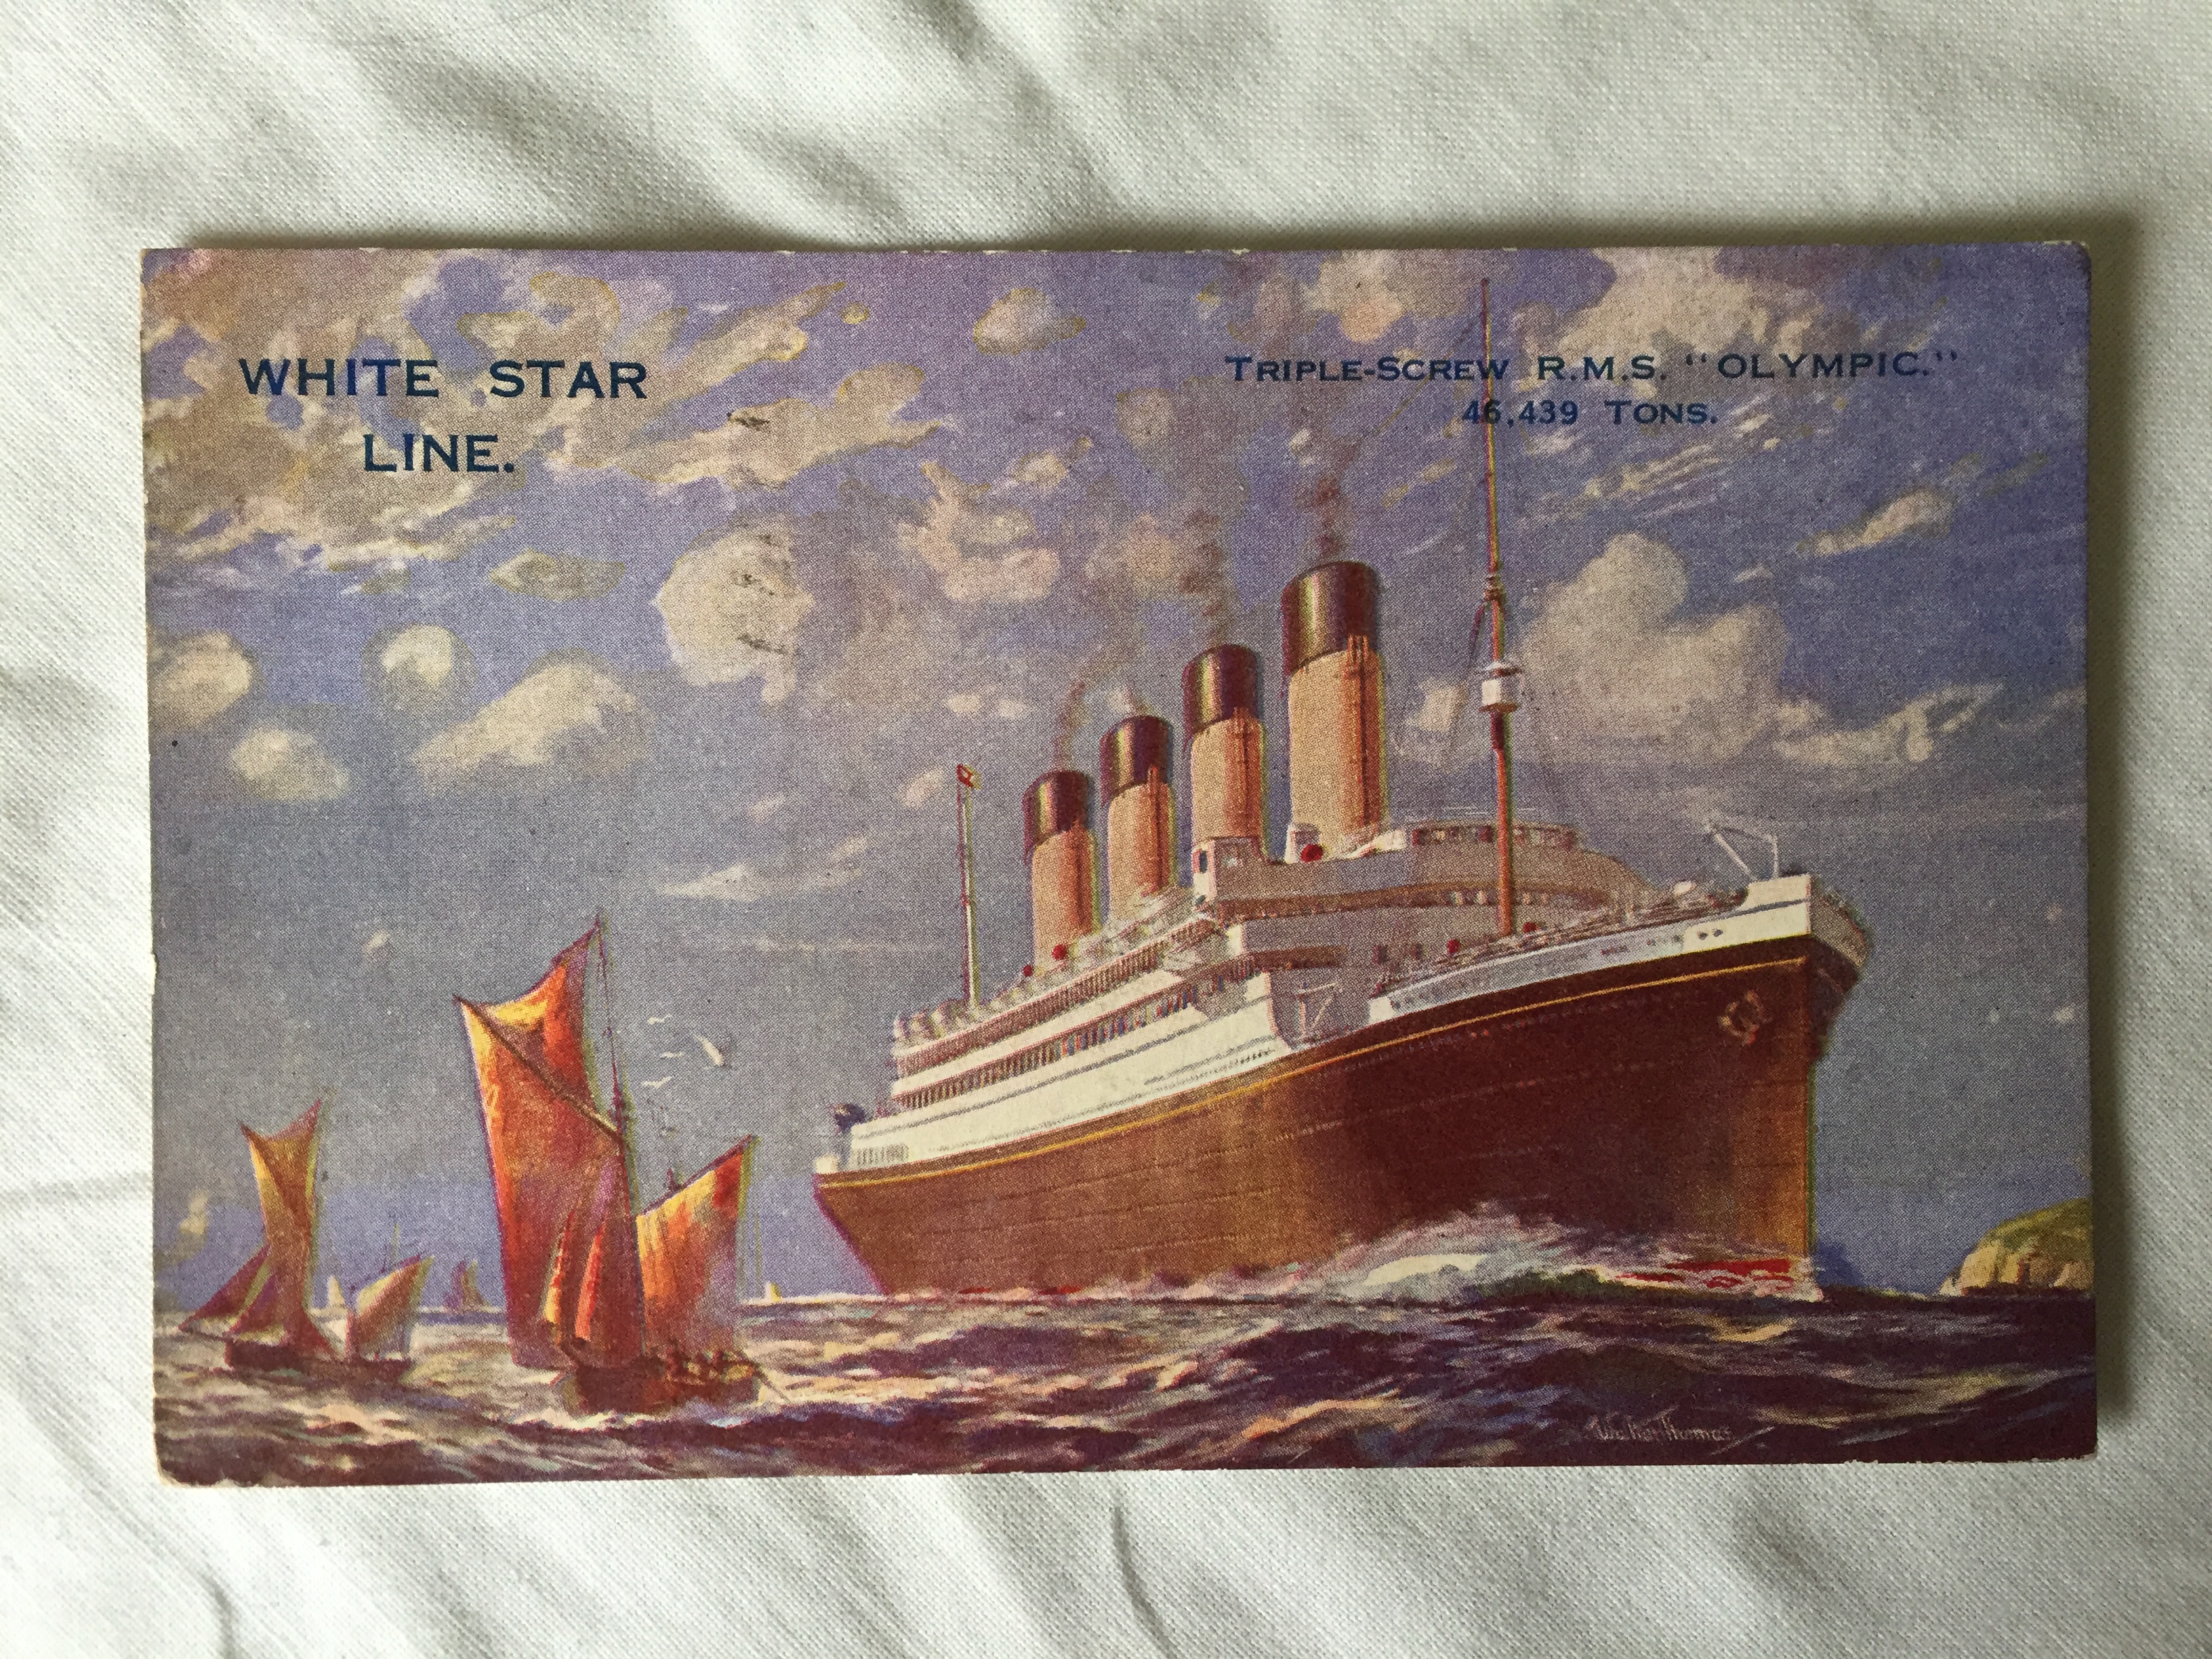 UNUSED COLOUR POSTCARD FROM THE CUNARD WHITE STAR LINE VESSEL THE RMS OLYMPIC